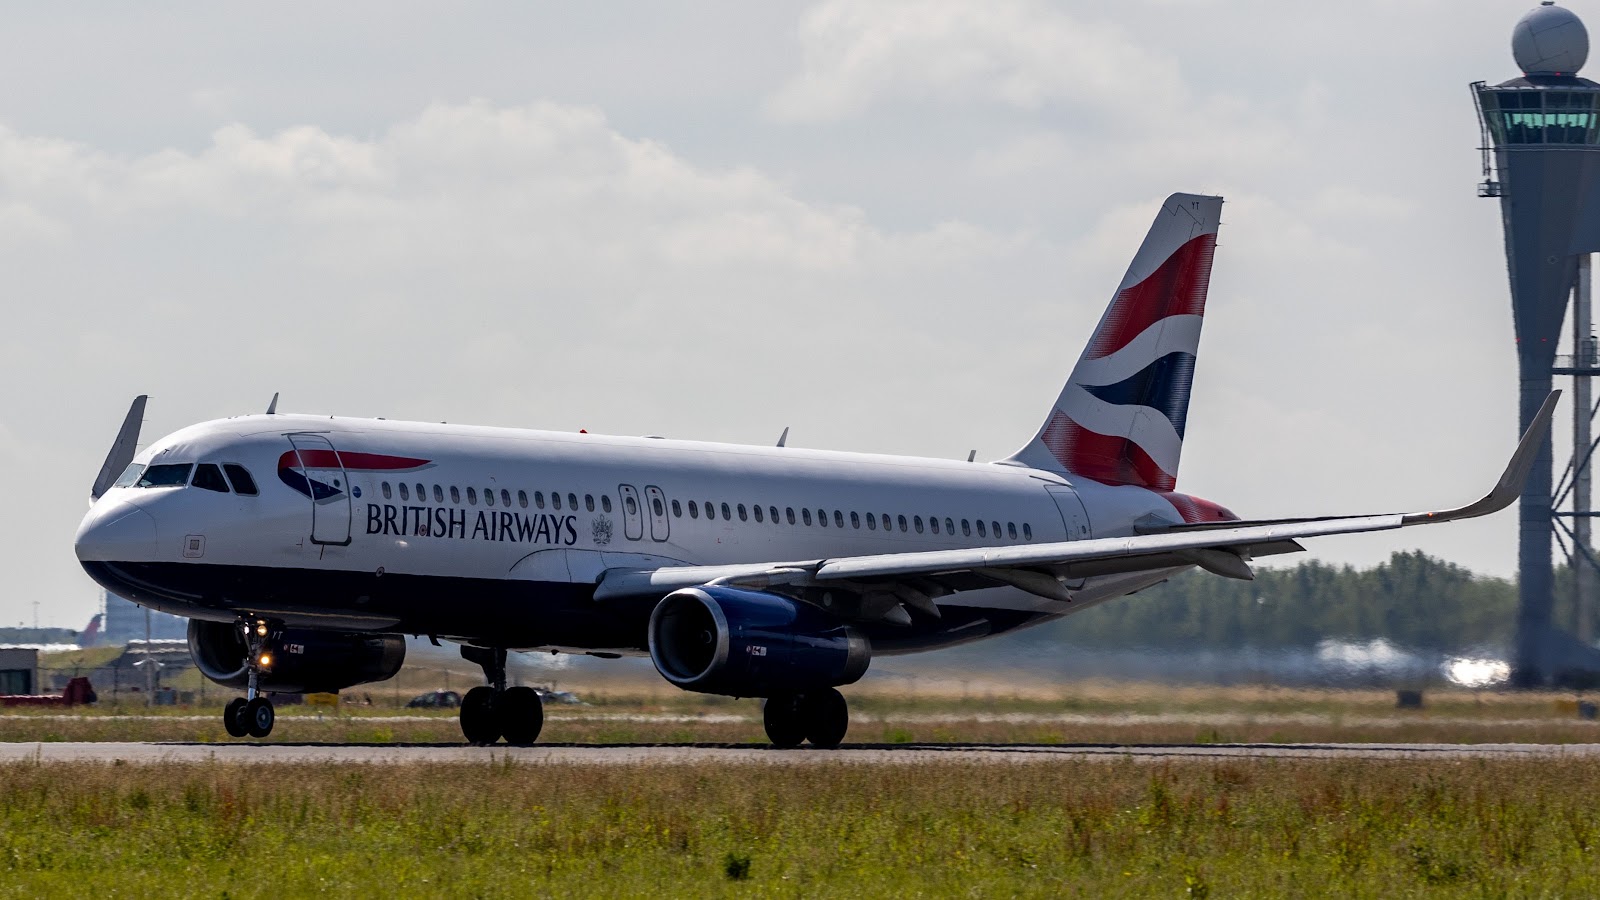 Following reports of smoke on board, British Airways' Airbus A320 is diverted to Amsterdam